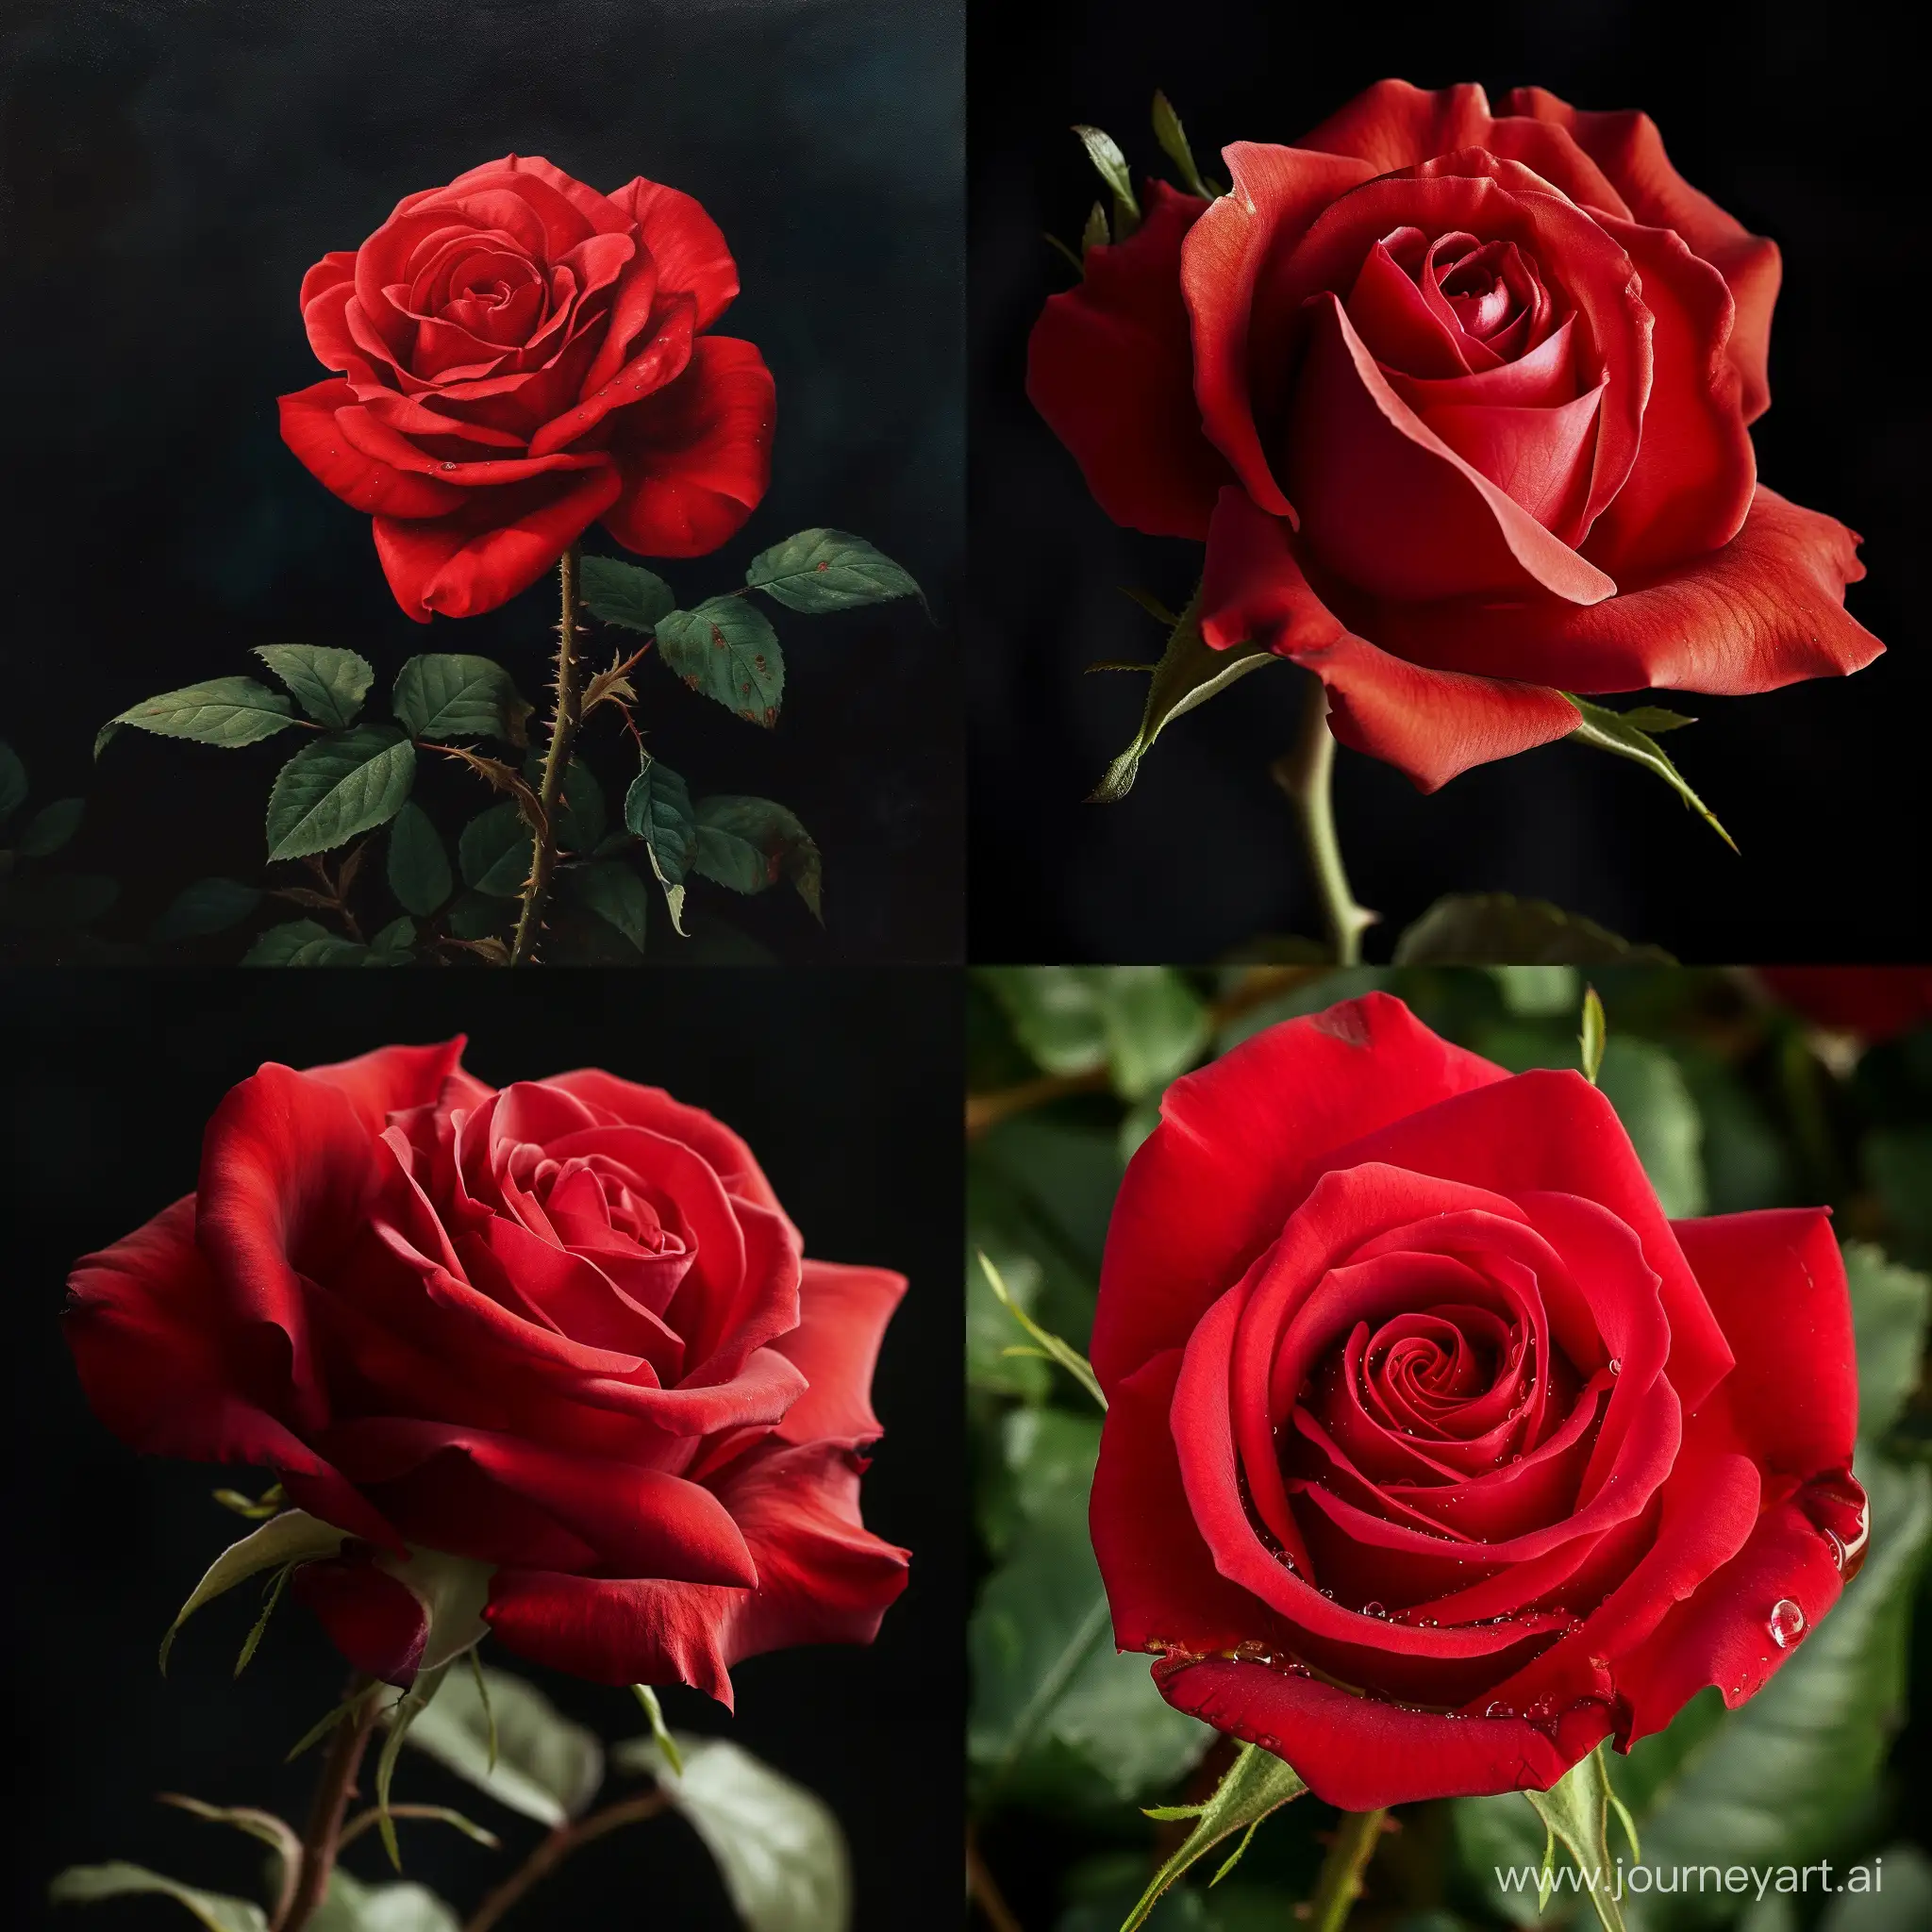 Vibrant-Red-Rose-in-a-Square-Frame-HighResolution-Floral-Photography